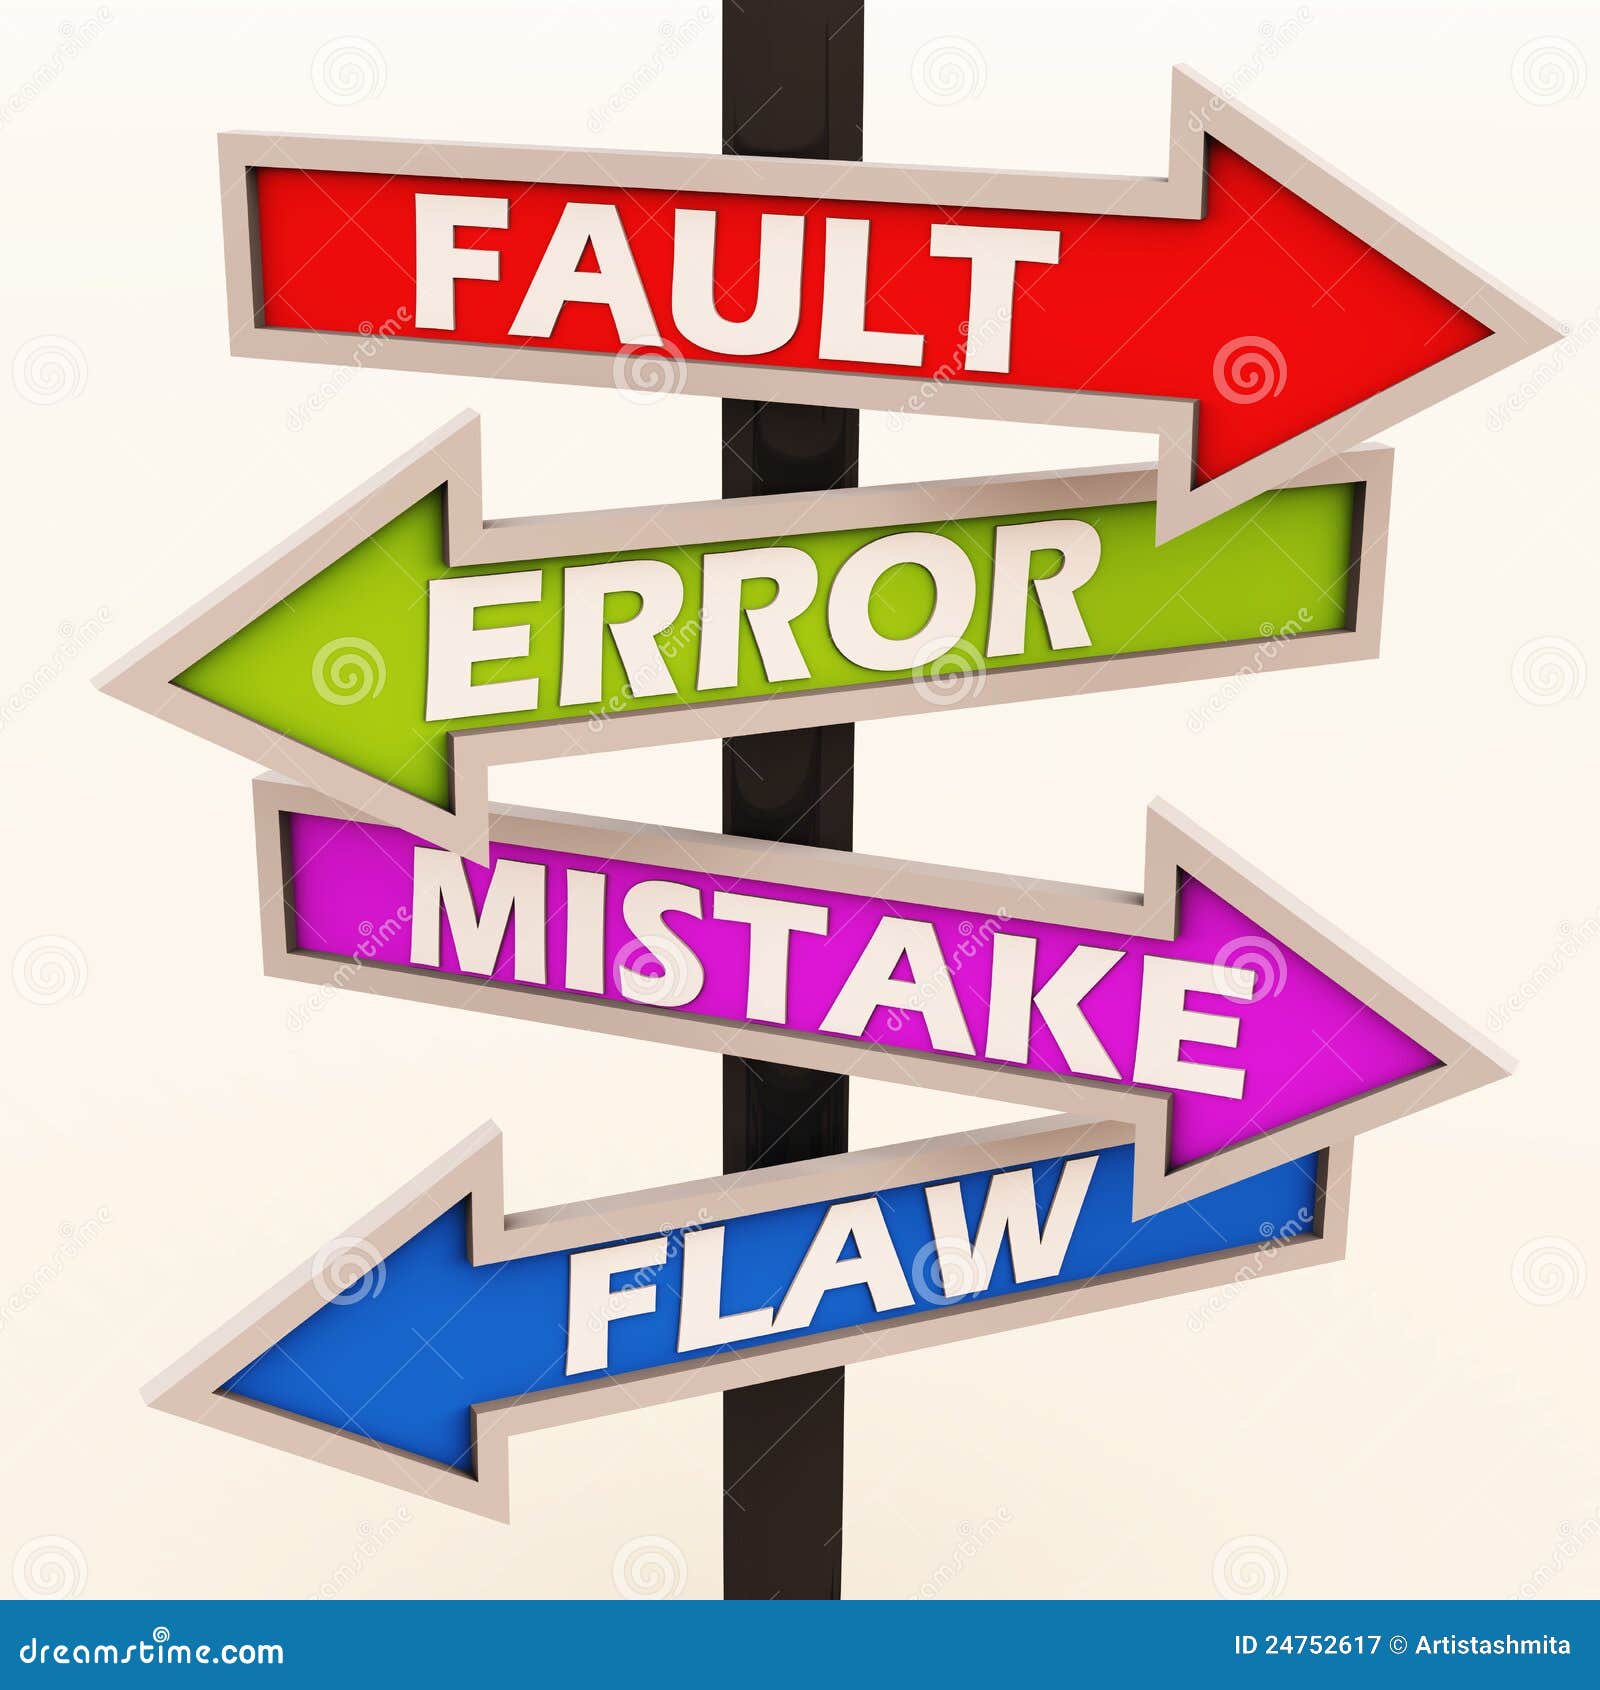 fault error mistake and flaws